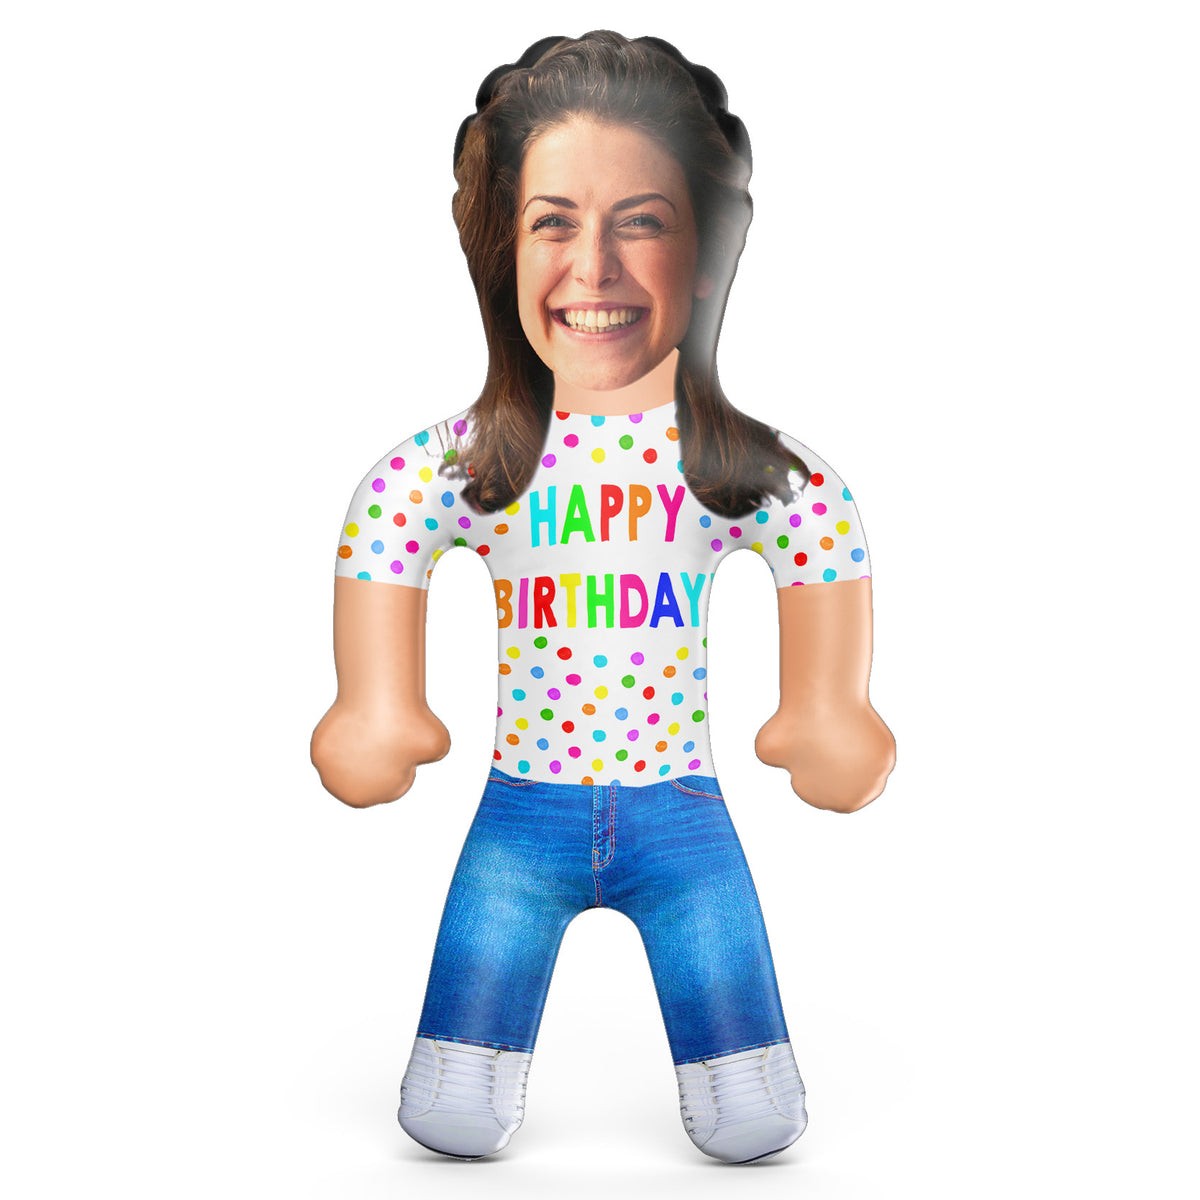 Happy Birthday Inflatable Doll - Custom Blow Up Doll